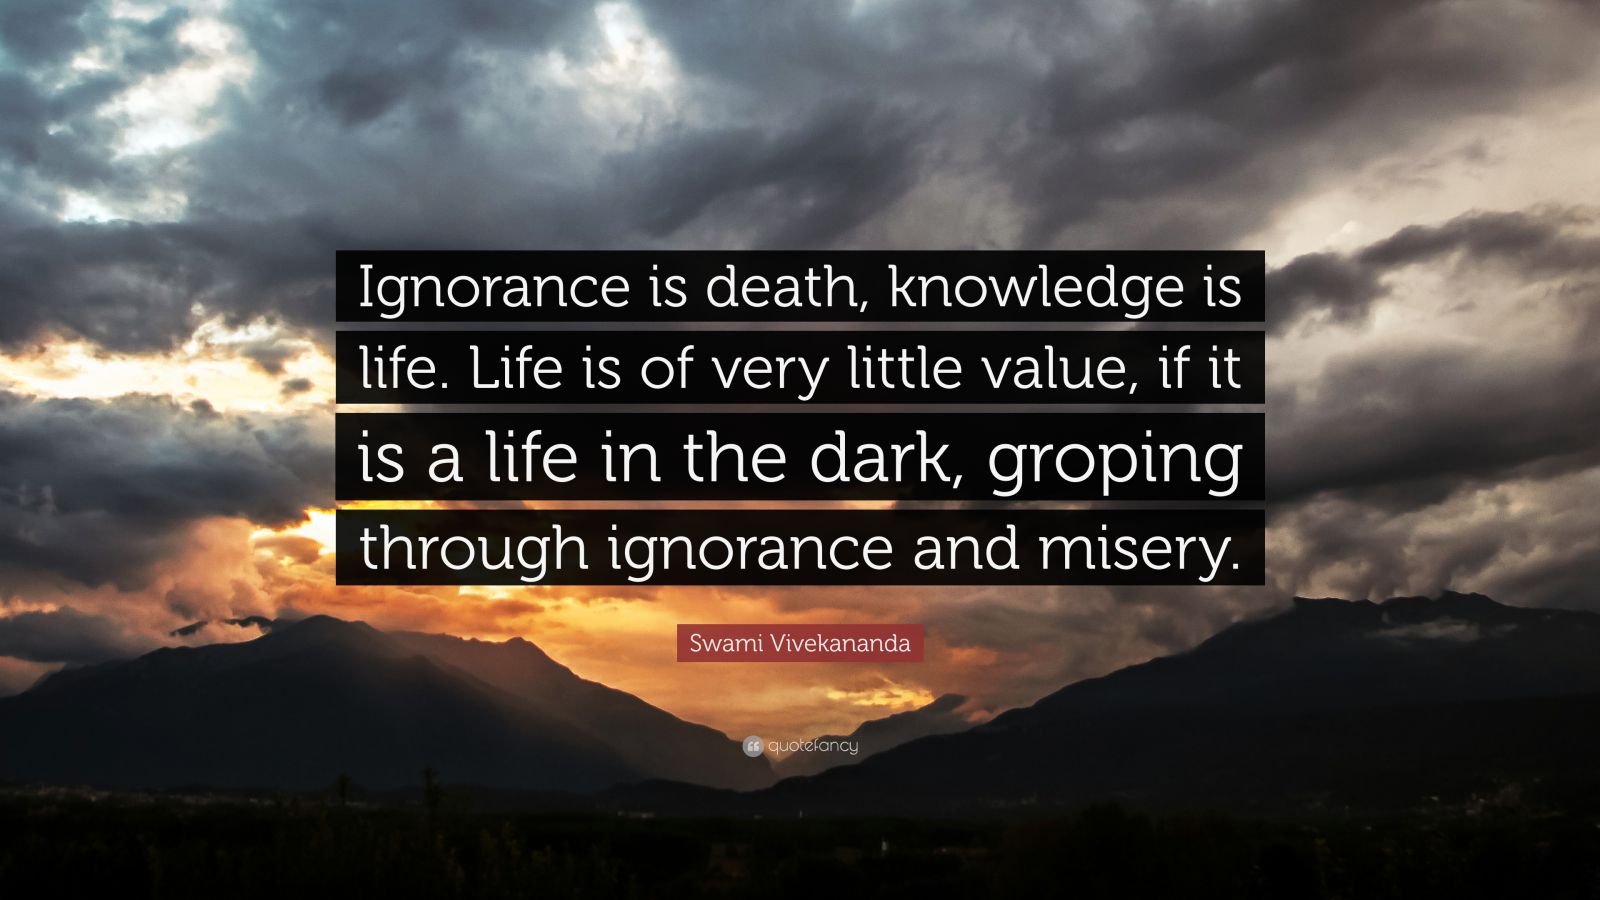 2877745 Swami Vivekananda Quote Ignorance is death knowledge is life Life